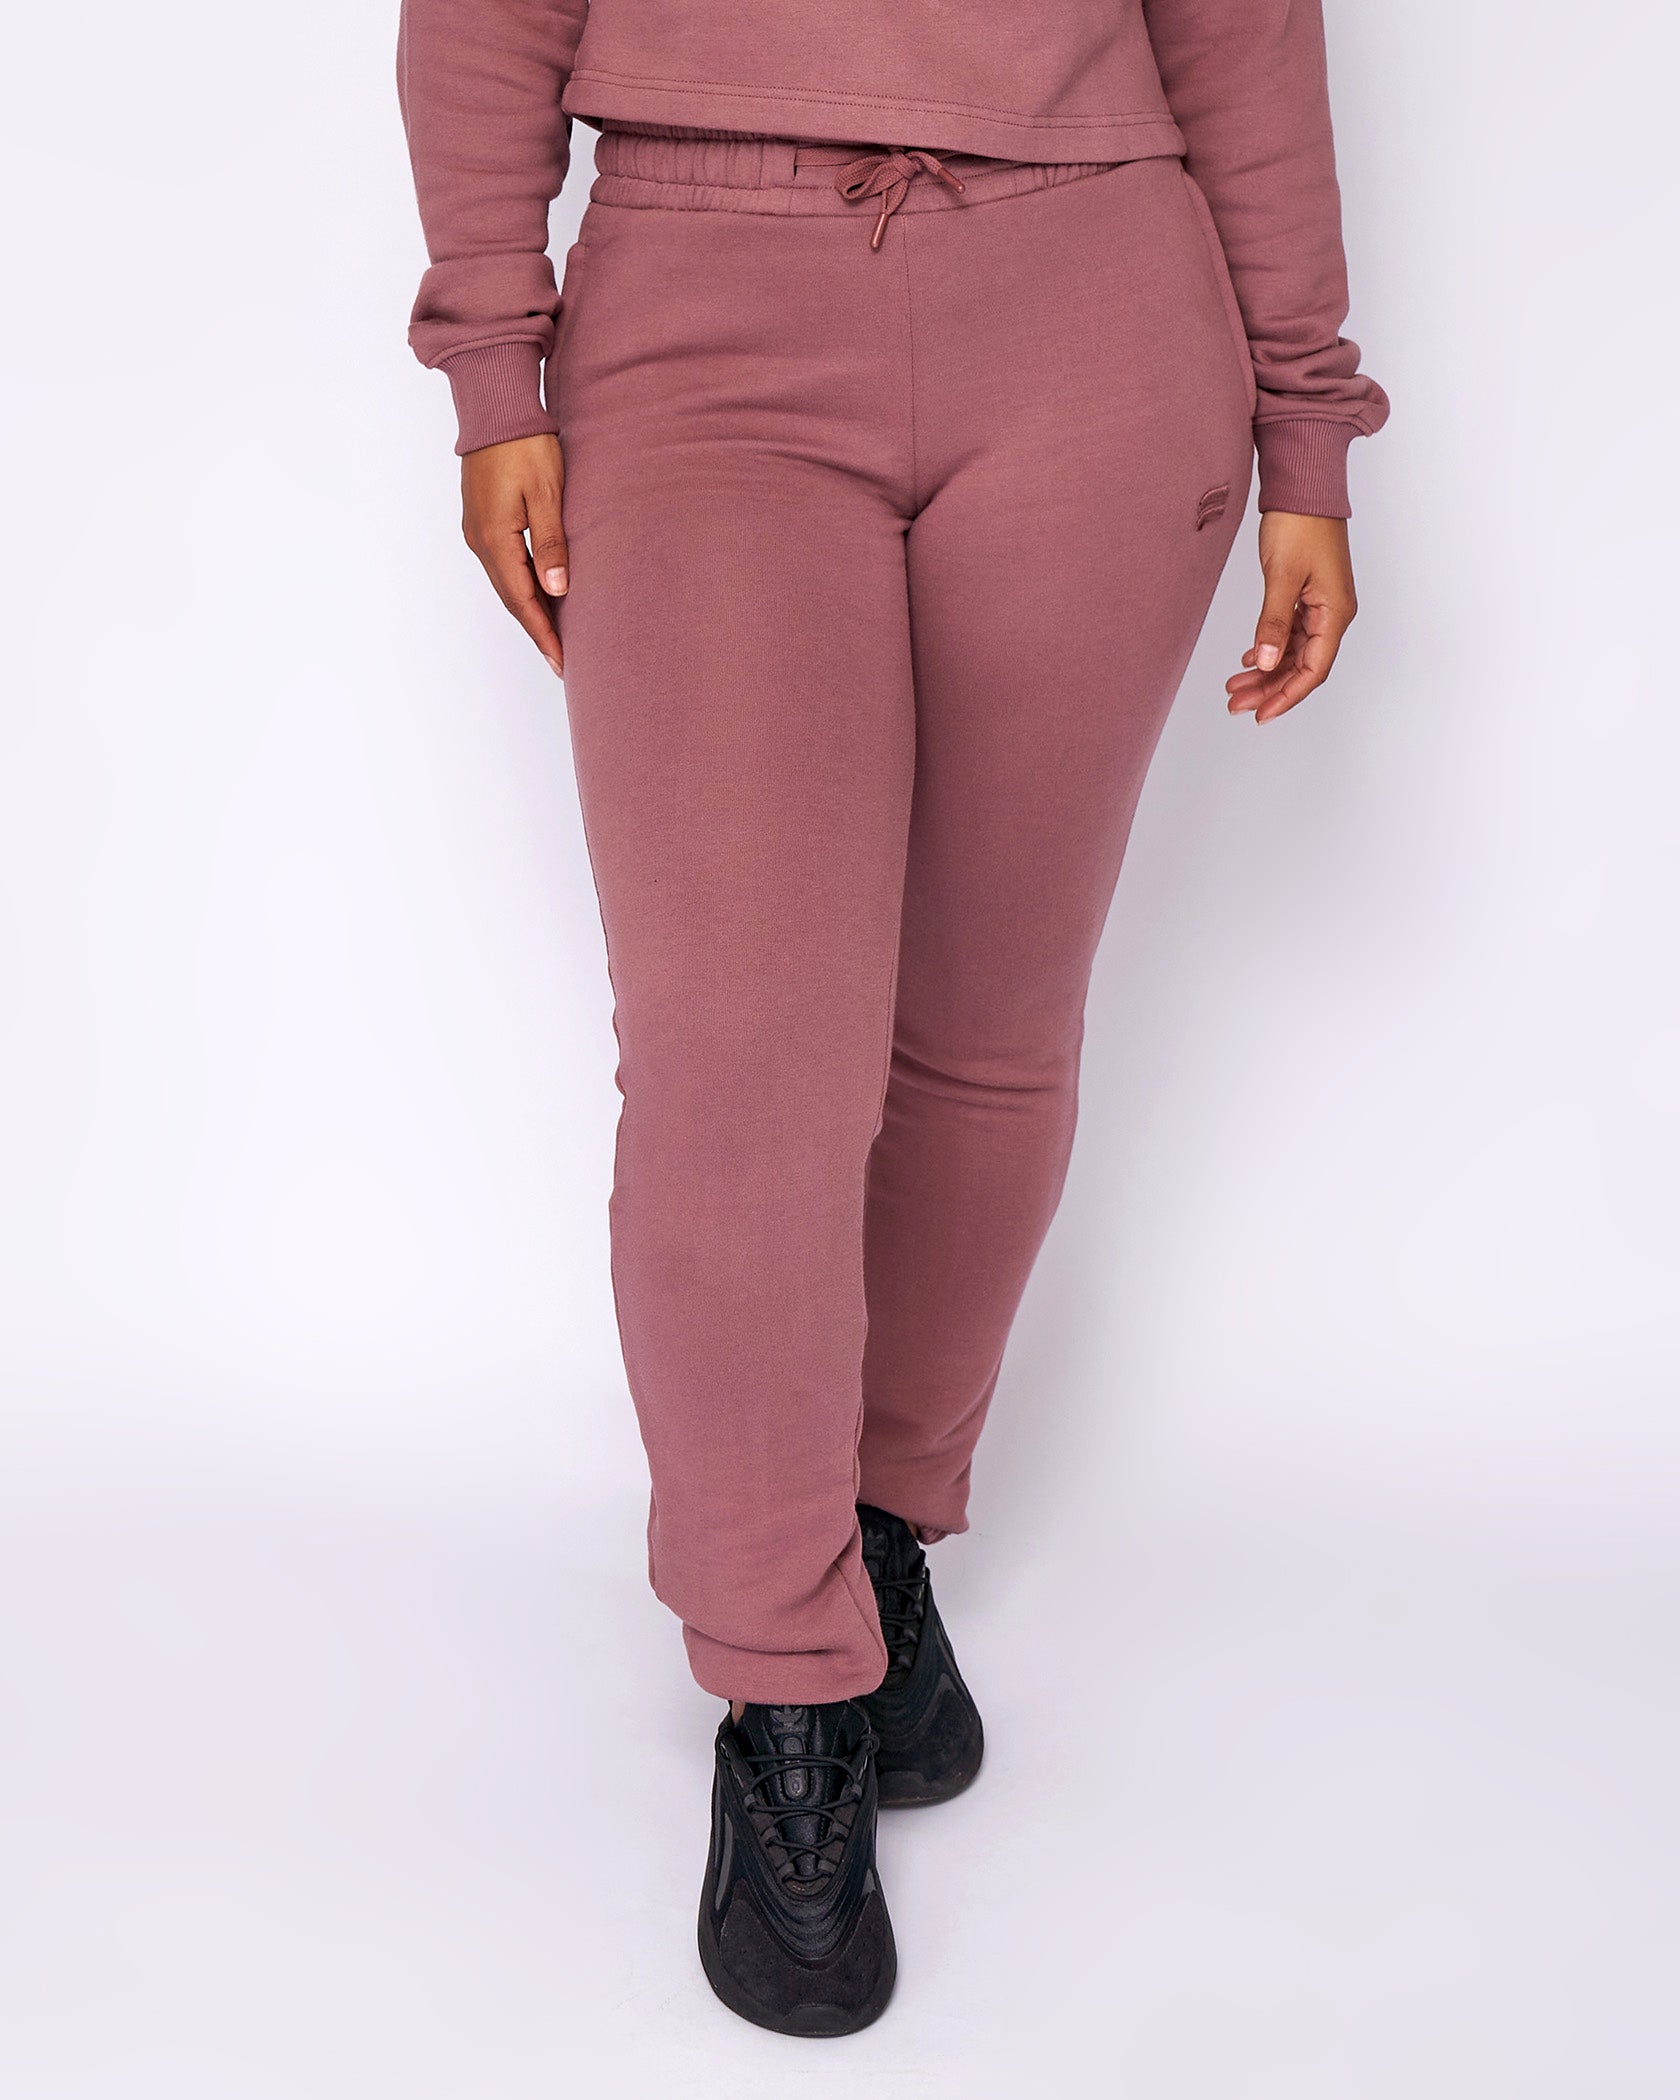 Essential Comfy Jogger - Rose Taupe - Fortex Fitness